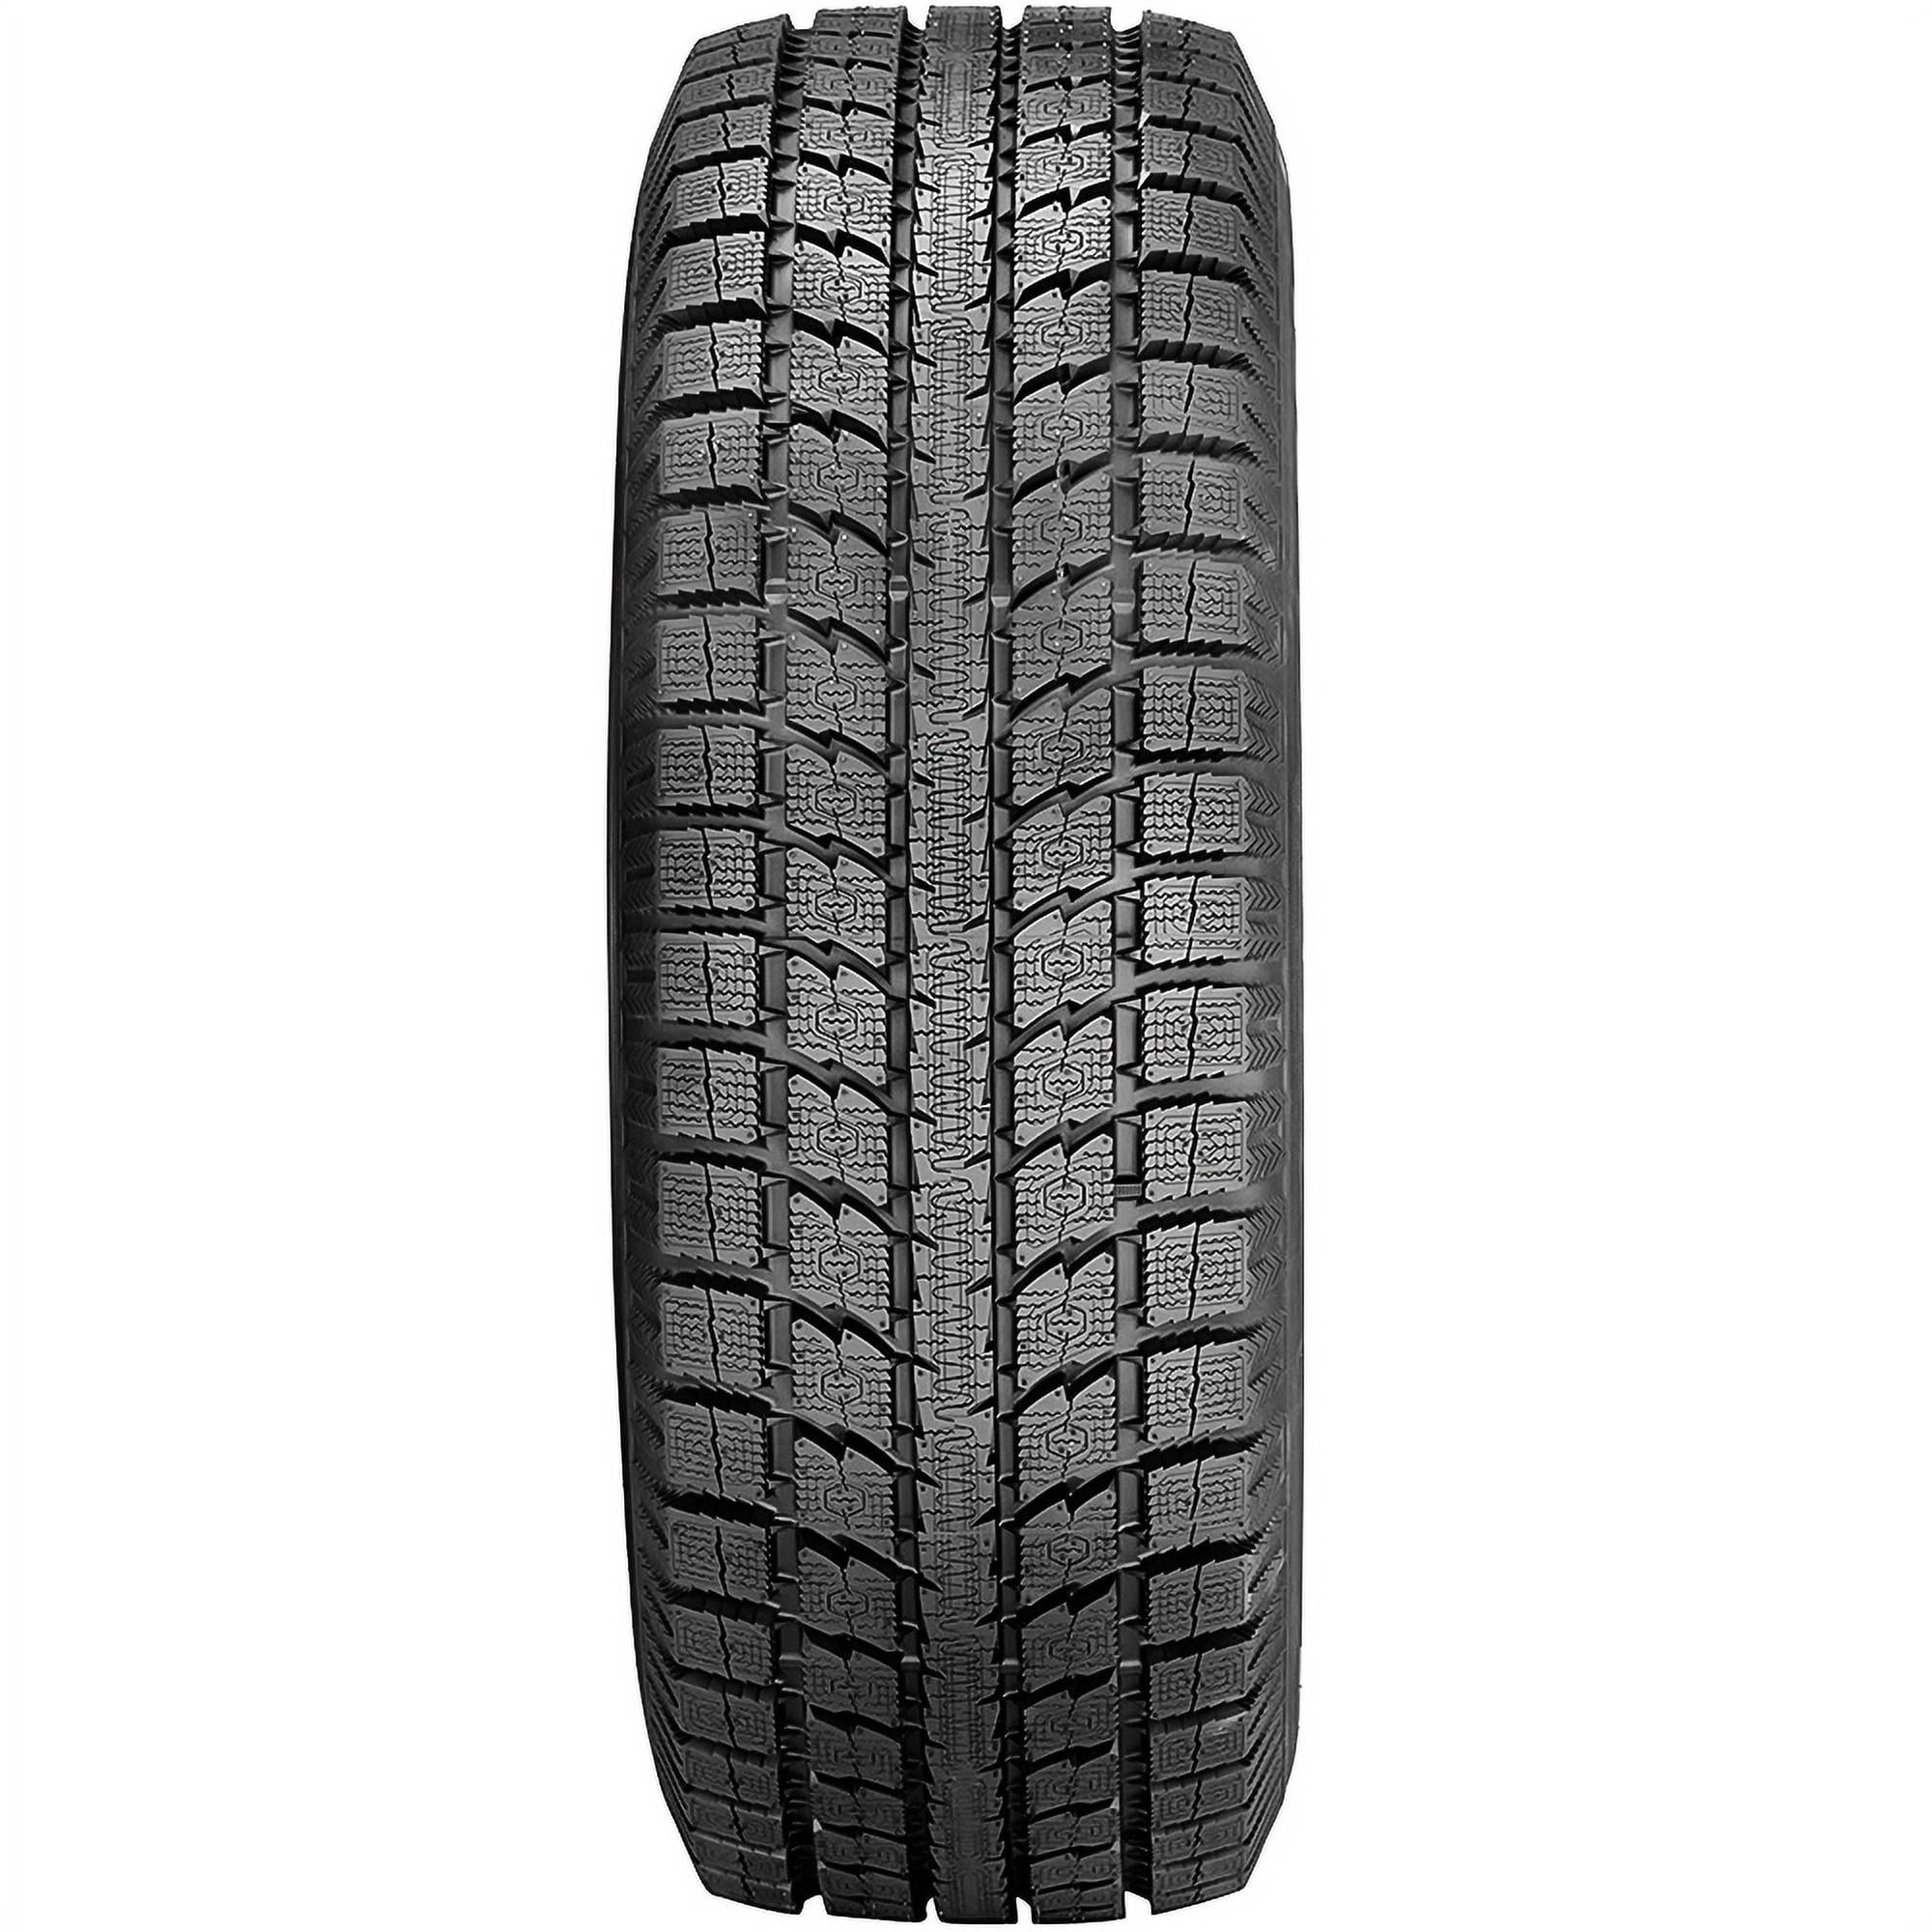 235/60-18 Toyo Observe GSi-5 Winter Performance Studless Tire 107S 2356018 